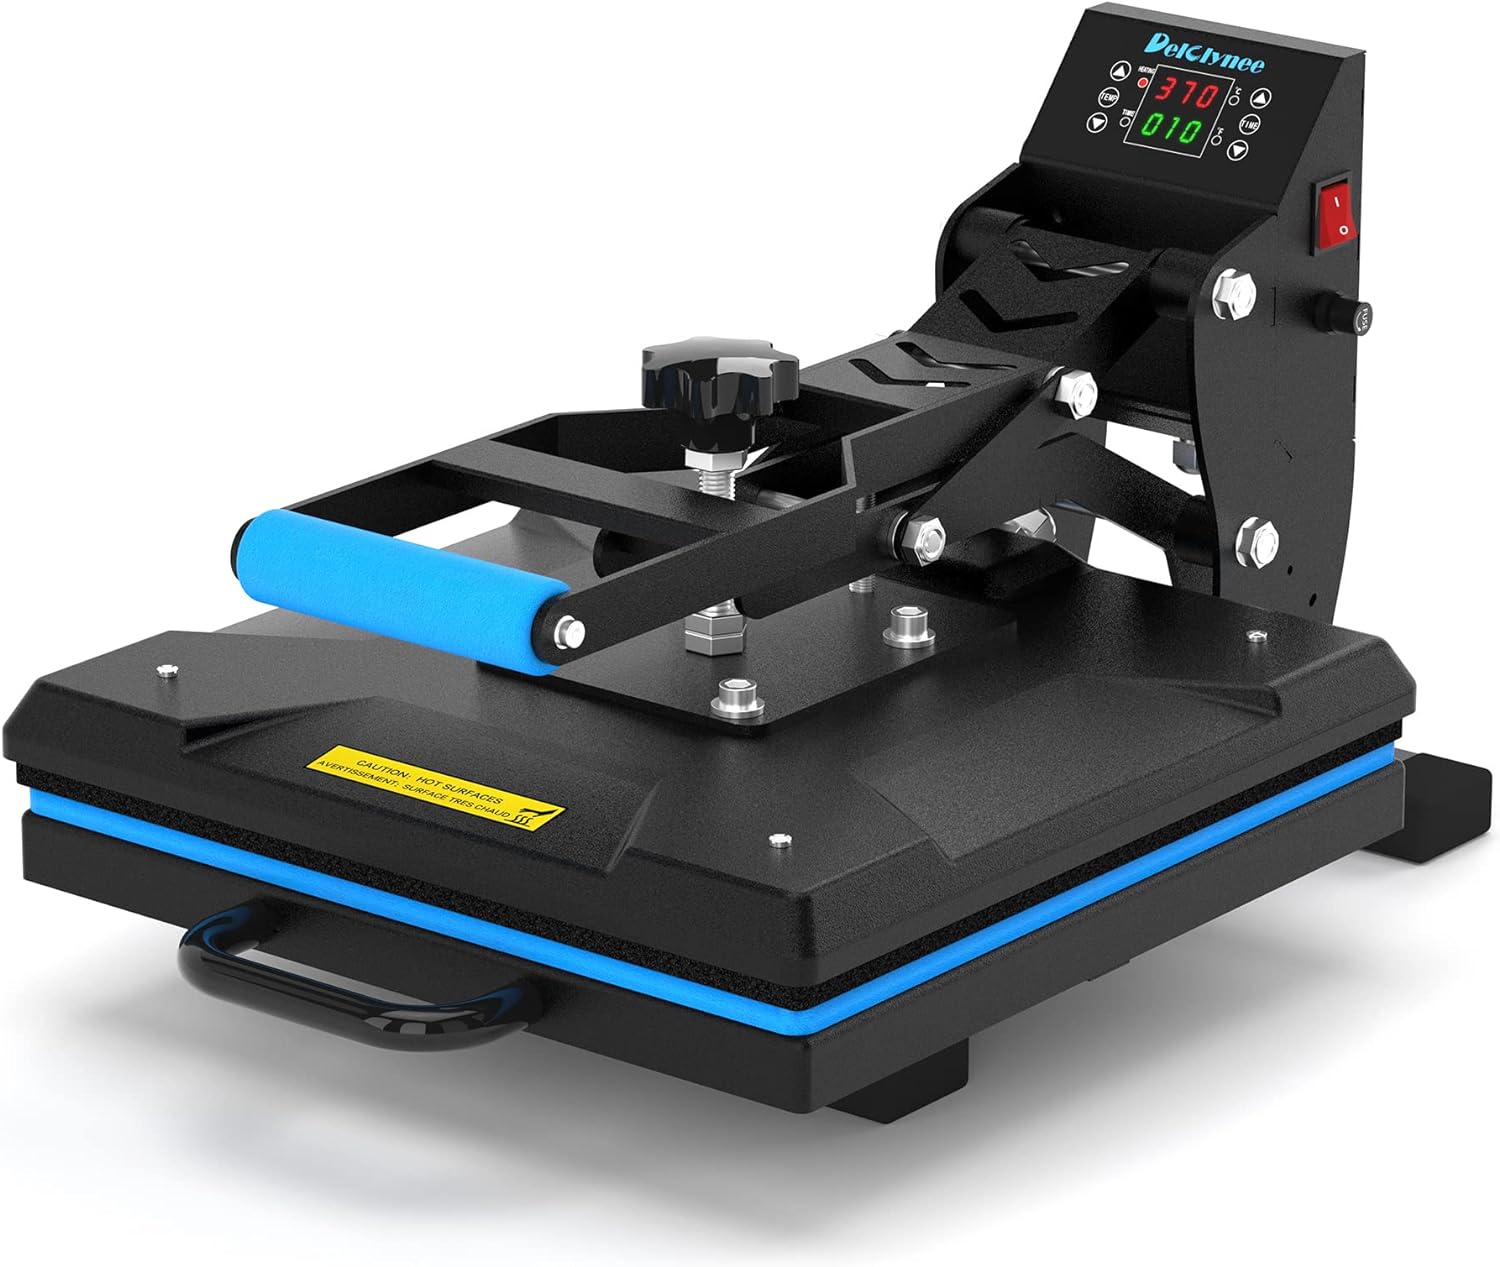 This is a great little heat press, far exceeds expectations. - My last heat press was a $2,500 Stahls Hotronix Fusion IQ 16x20. I loved it, but I'm going through a divorce and dividing property hasn't been settled yet. I needed a good heat press for cheap, and I came across this little guy. I didn't expect much, but figured it might get me by until I could either get my Stahls back or afford a better one. I've only owned it about a month, but have pressed maybe 50 garments with it. Each garment 